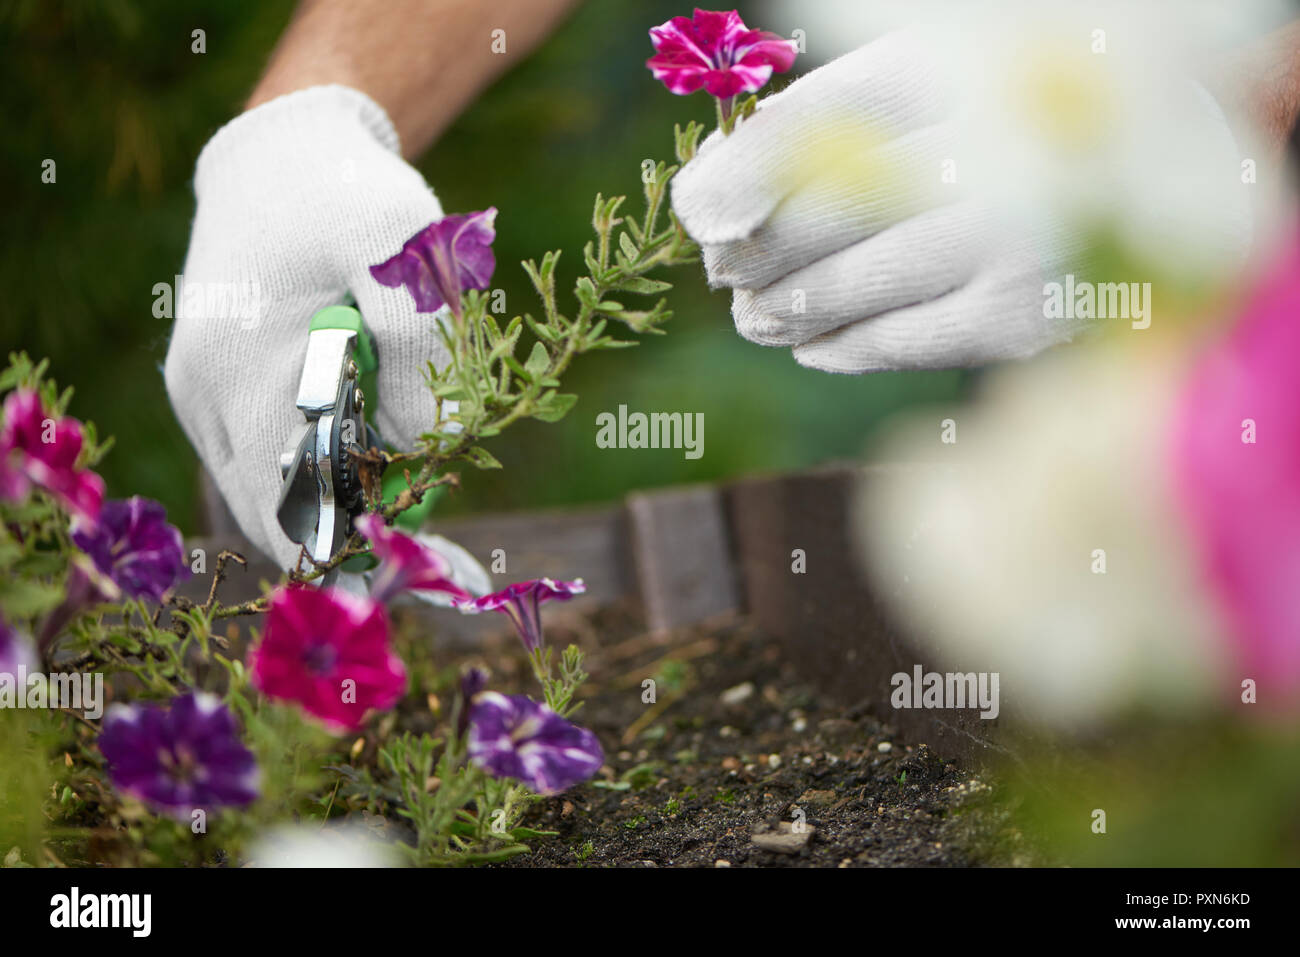 Close up of male worker hands cutting flowers off using pruner. Gardener gathering flowers in garden to collect seeds of these plants, to grow another bush of flowers in future. Gardening concept. Stock Photo